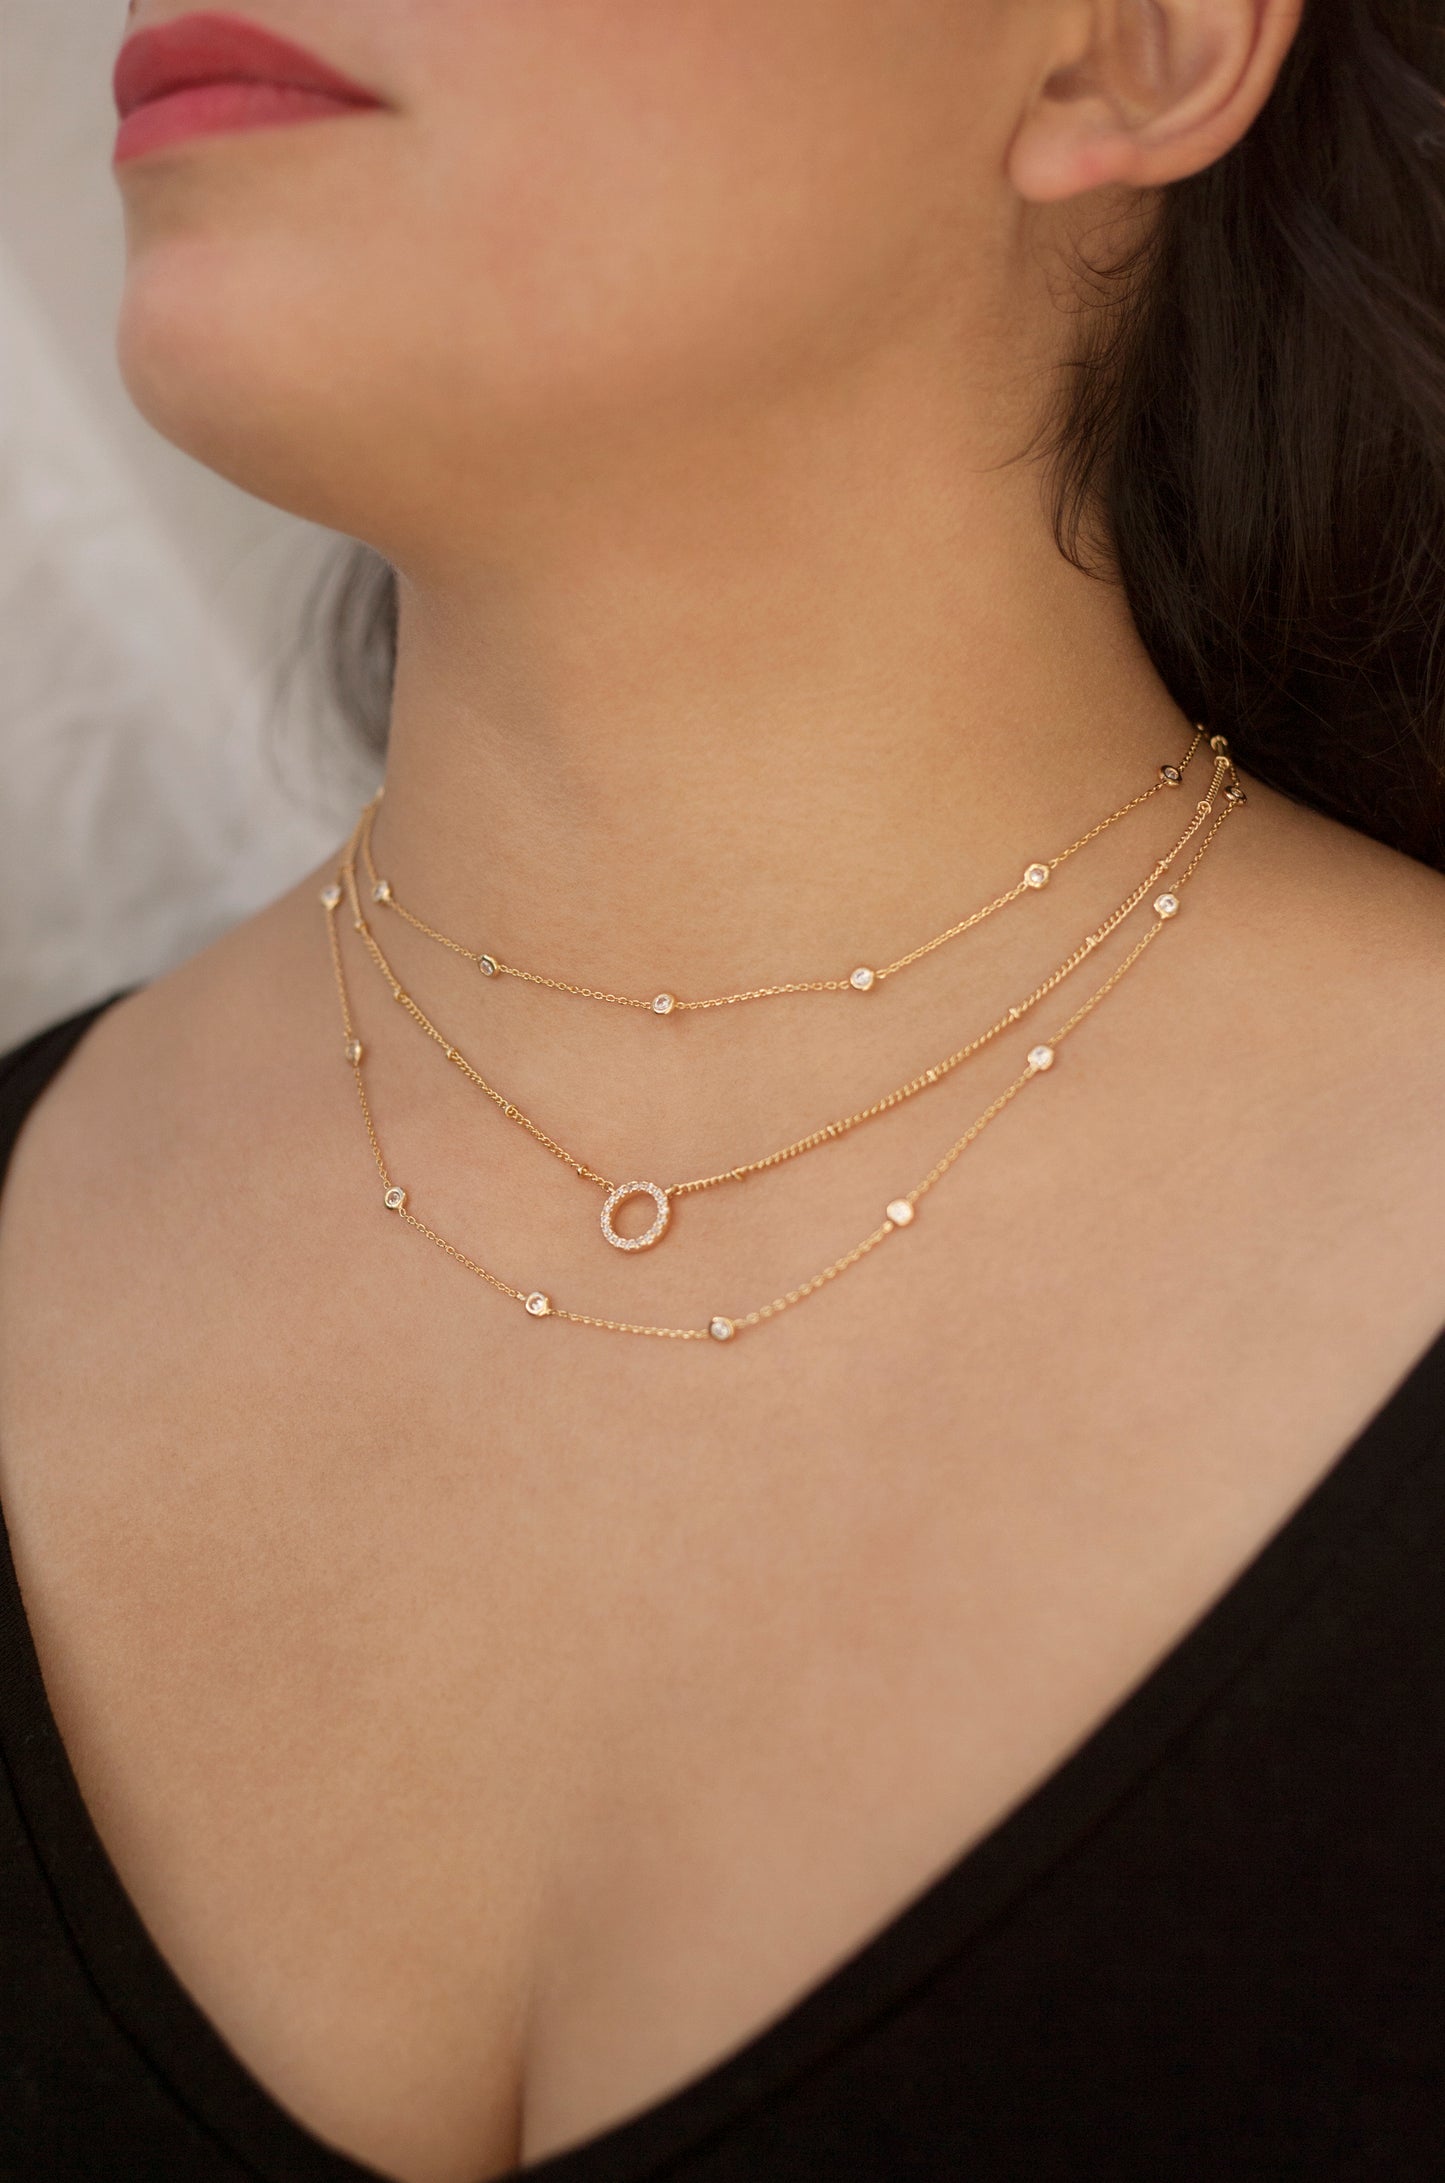 Monroe Crystal Strand Layered Necklace shown on a model  